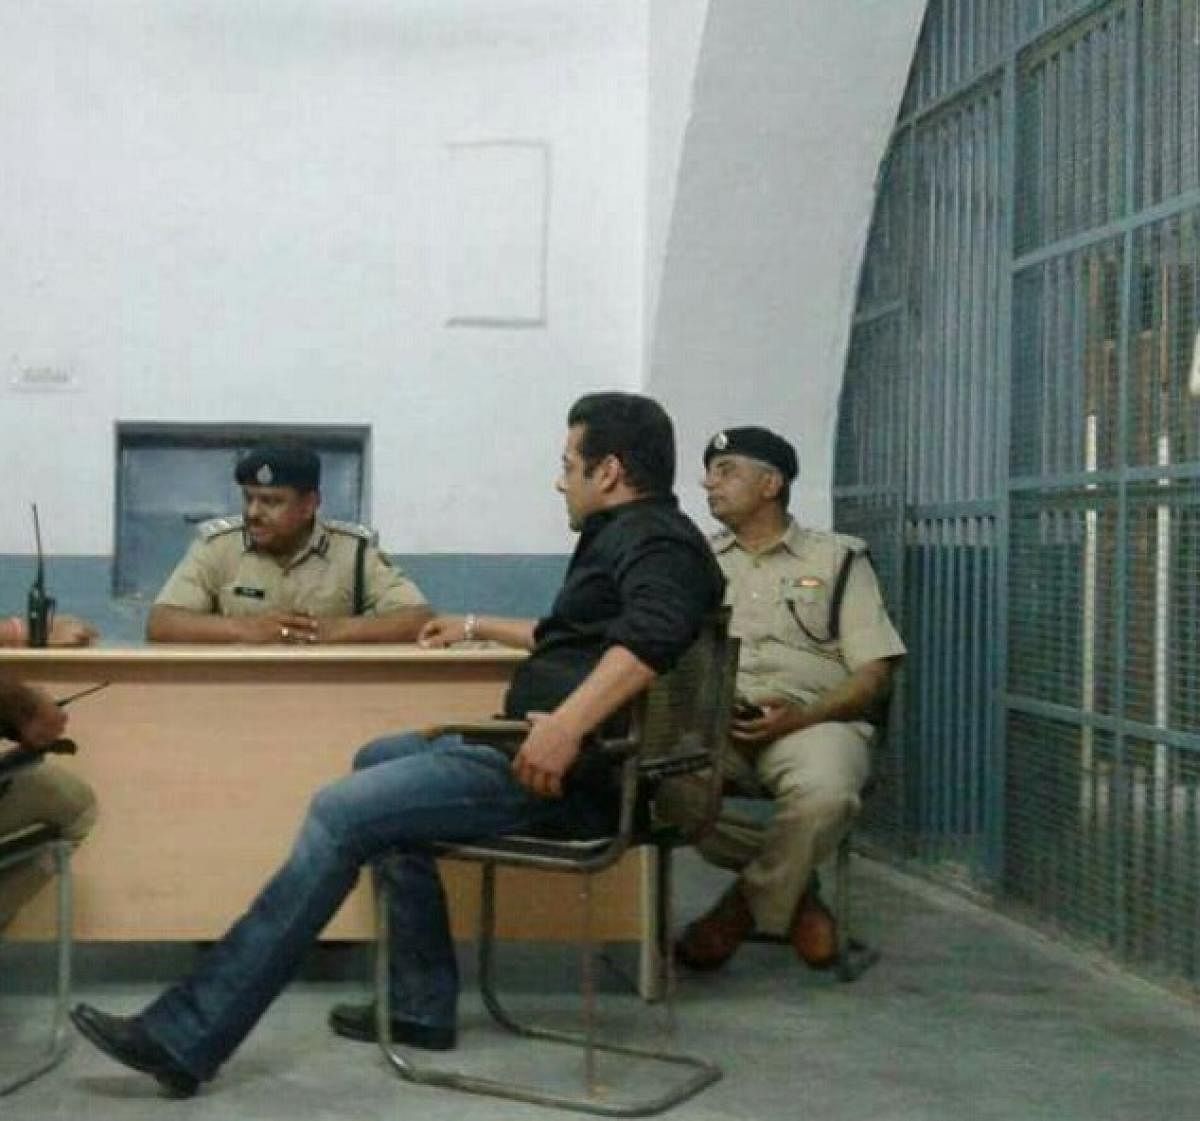 The actor at the jail.